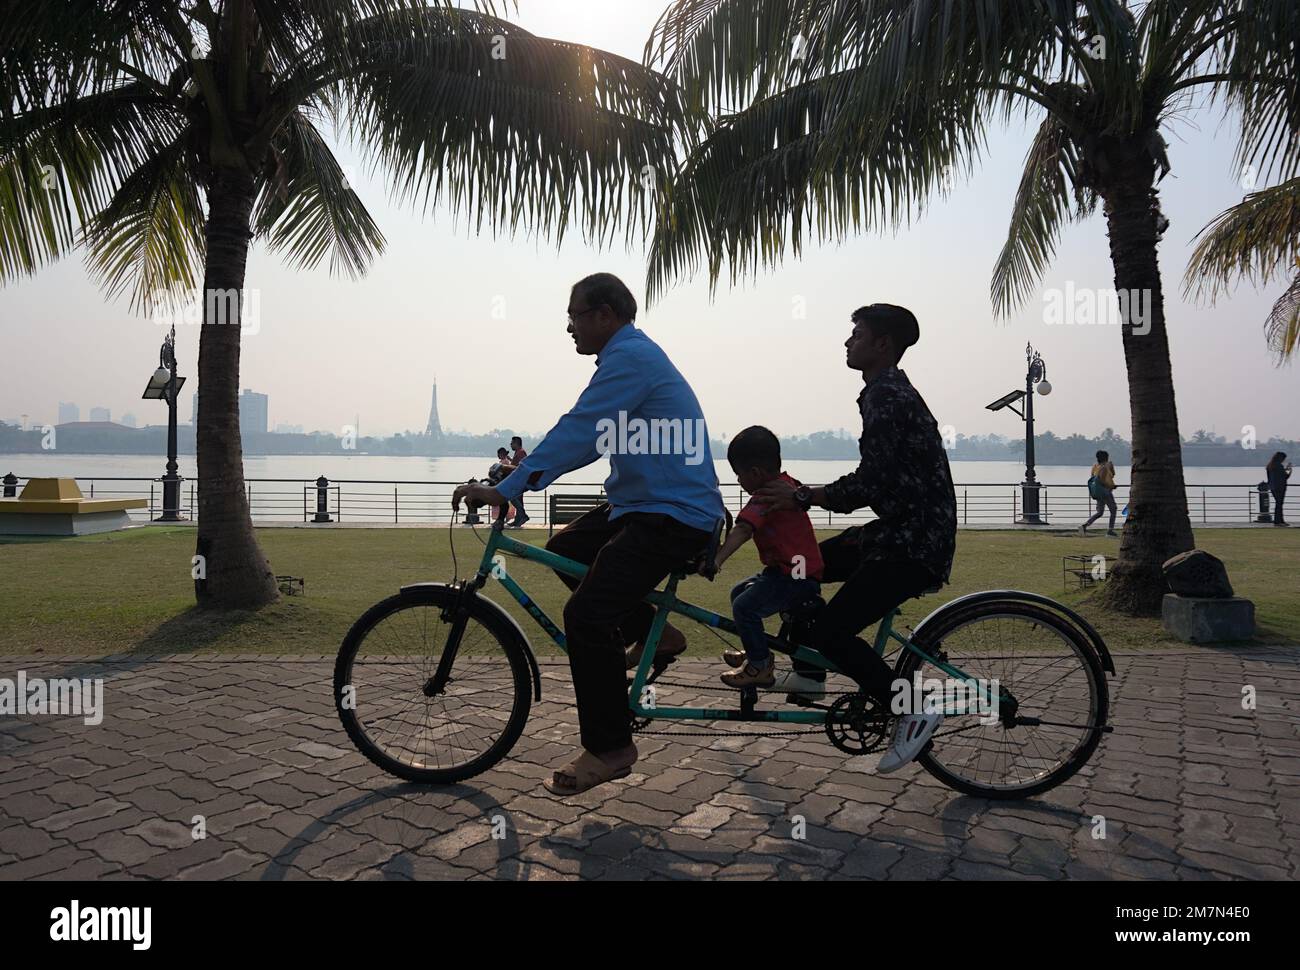 Three persons riding a bicycle called Tandem bicycle on a sunny day by a lake. Three persons of different ages, adult, young, Toddler. Stock Photo